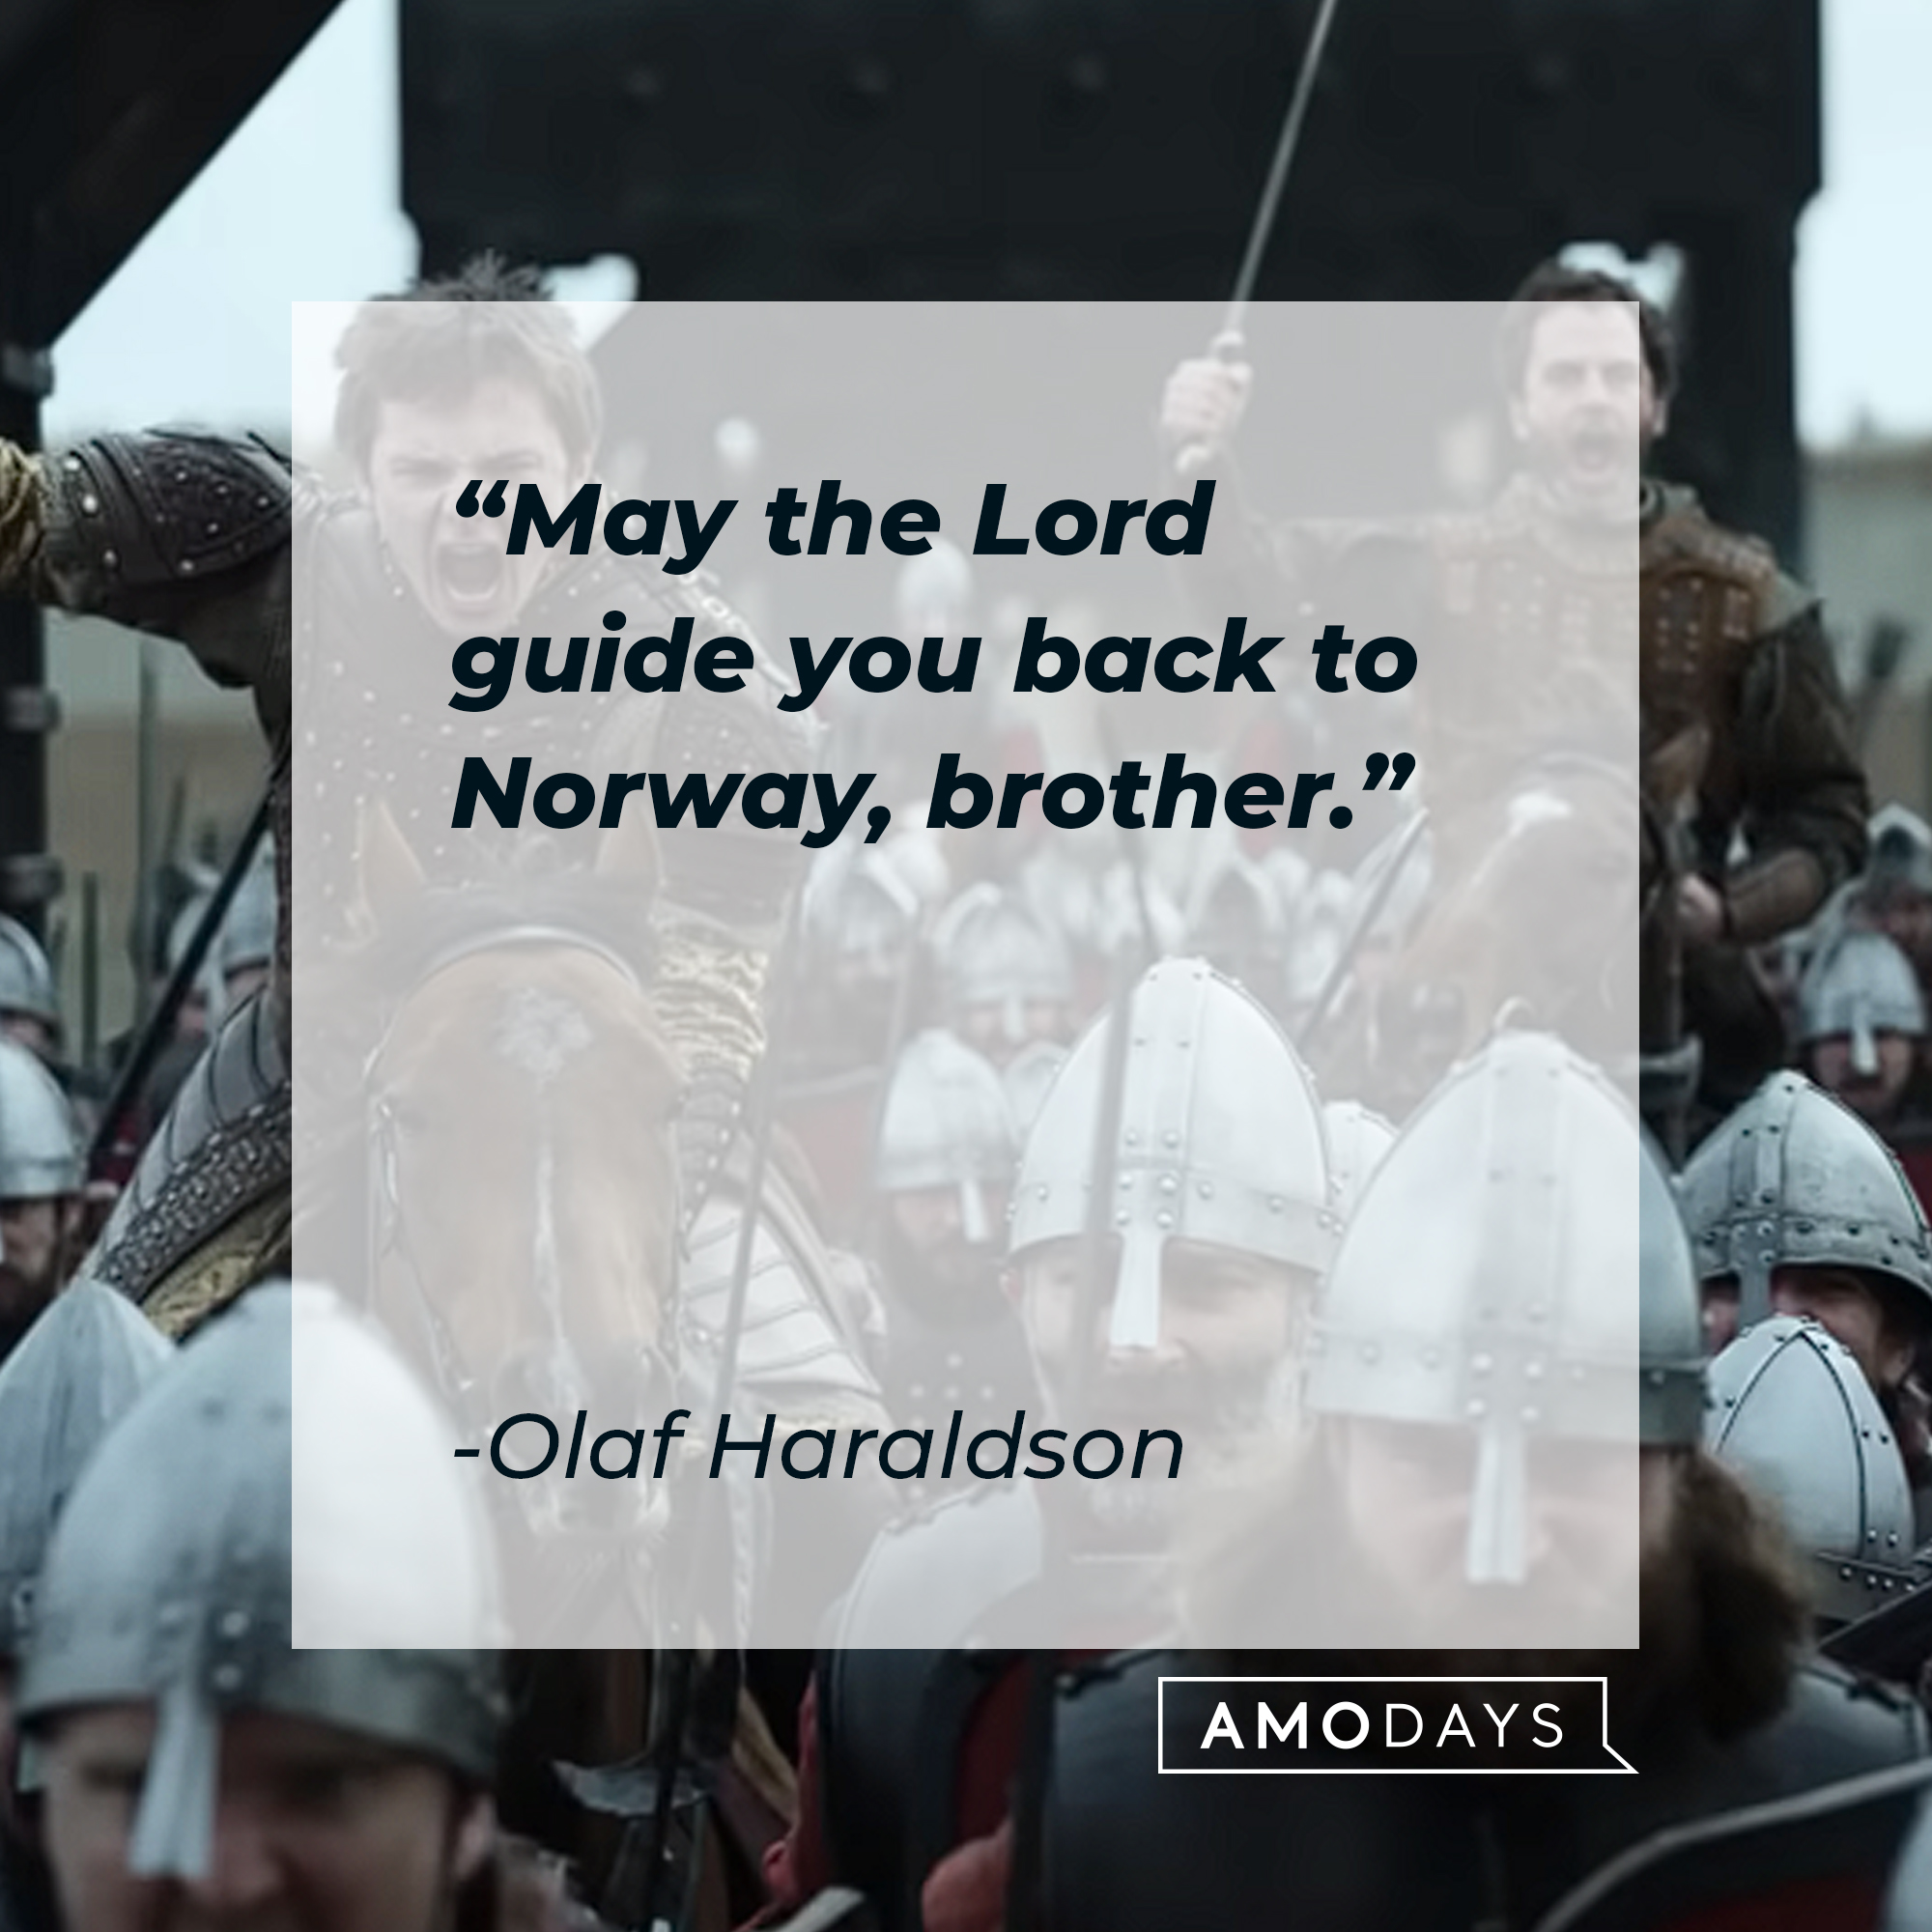 A picture from the series“Vikings: Valhalla” with-Olaf Haraldson’s quote: “May the Lord guide you back to Norway, brother.” | Source: youtube.com/Netflix